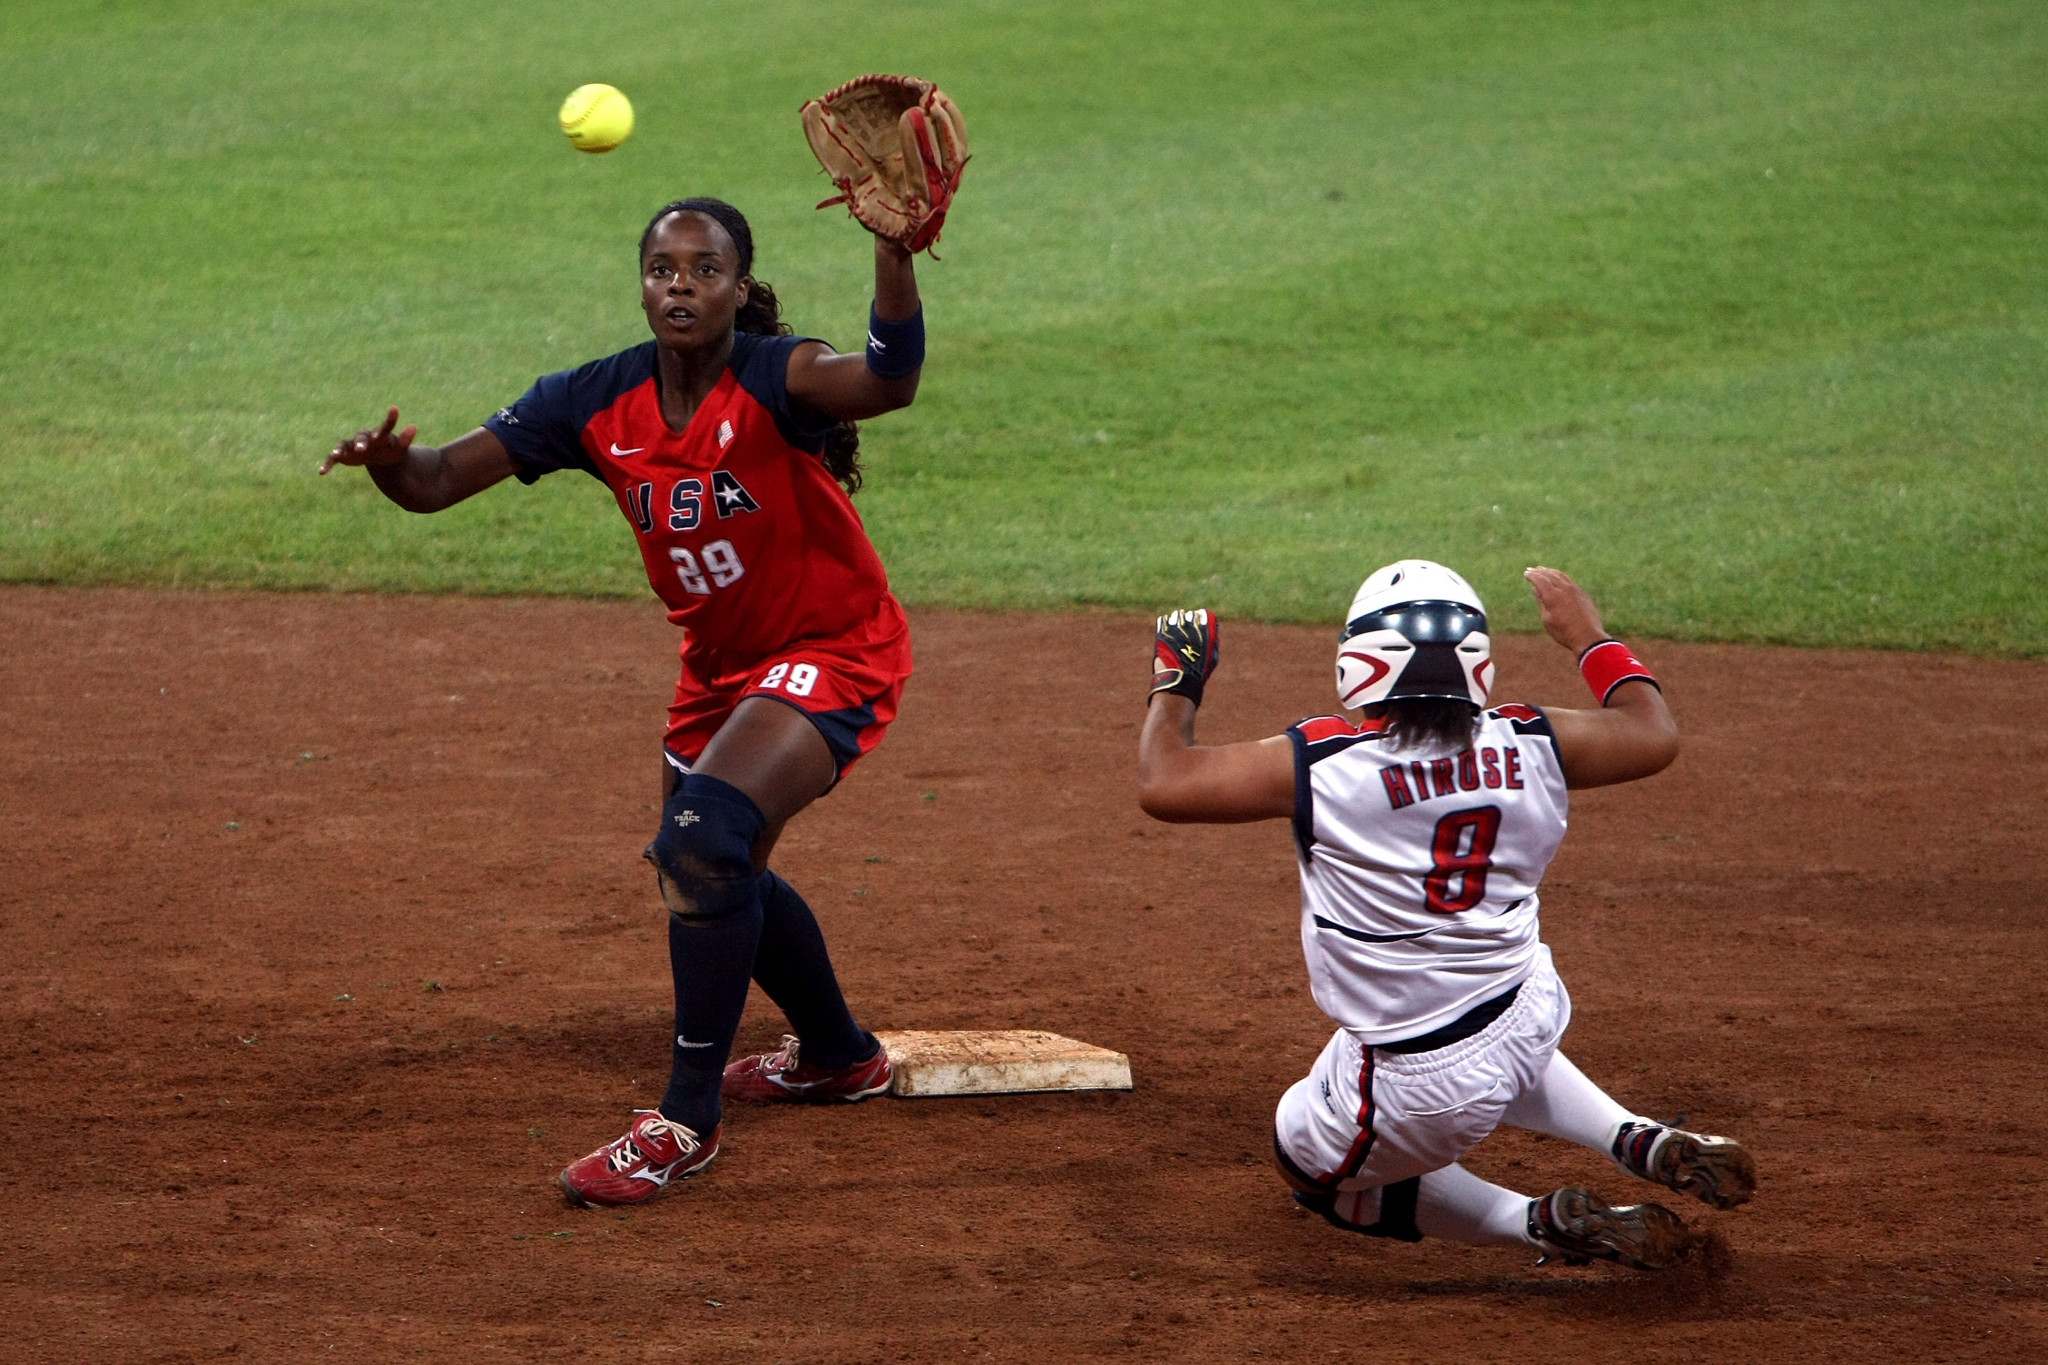 Softball is set to make its return to the Olympics at Tokyo 2020, having last appeared at Beijing 2008 ©Getty Images